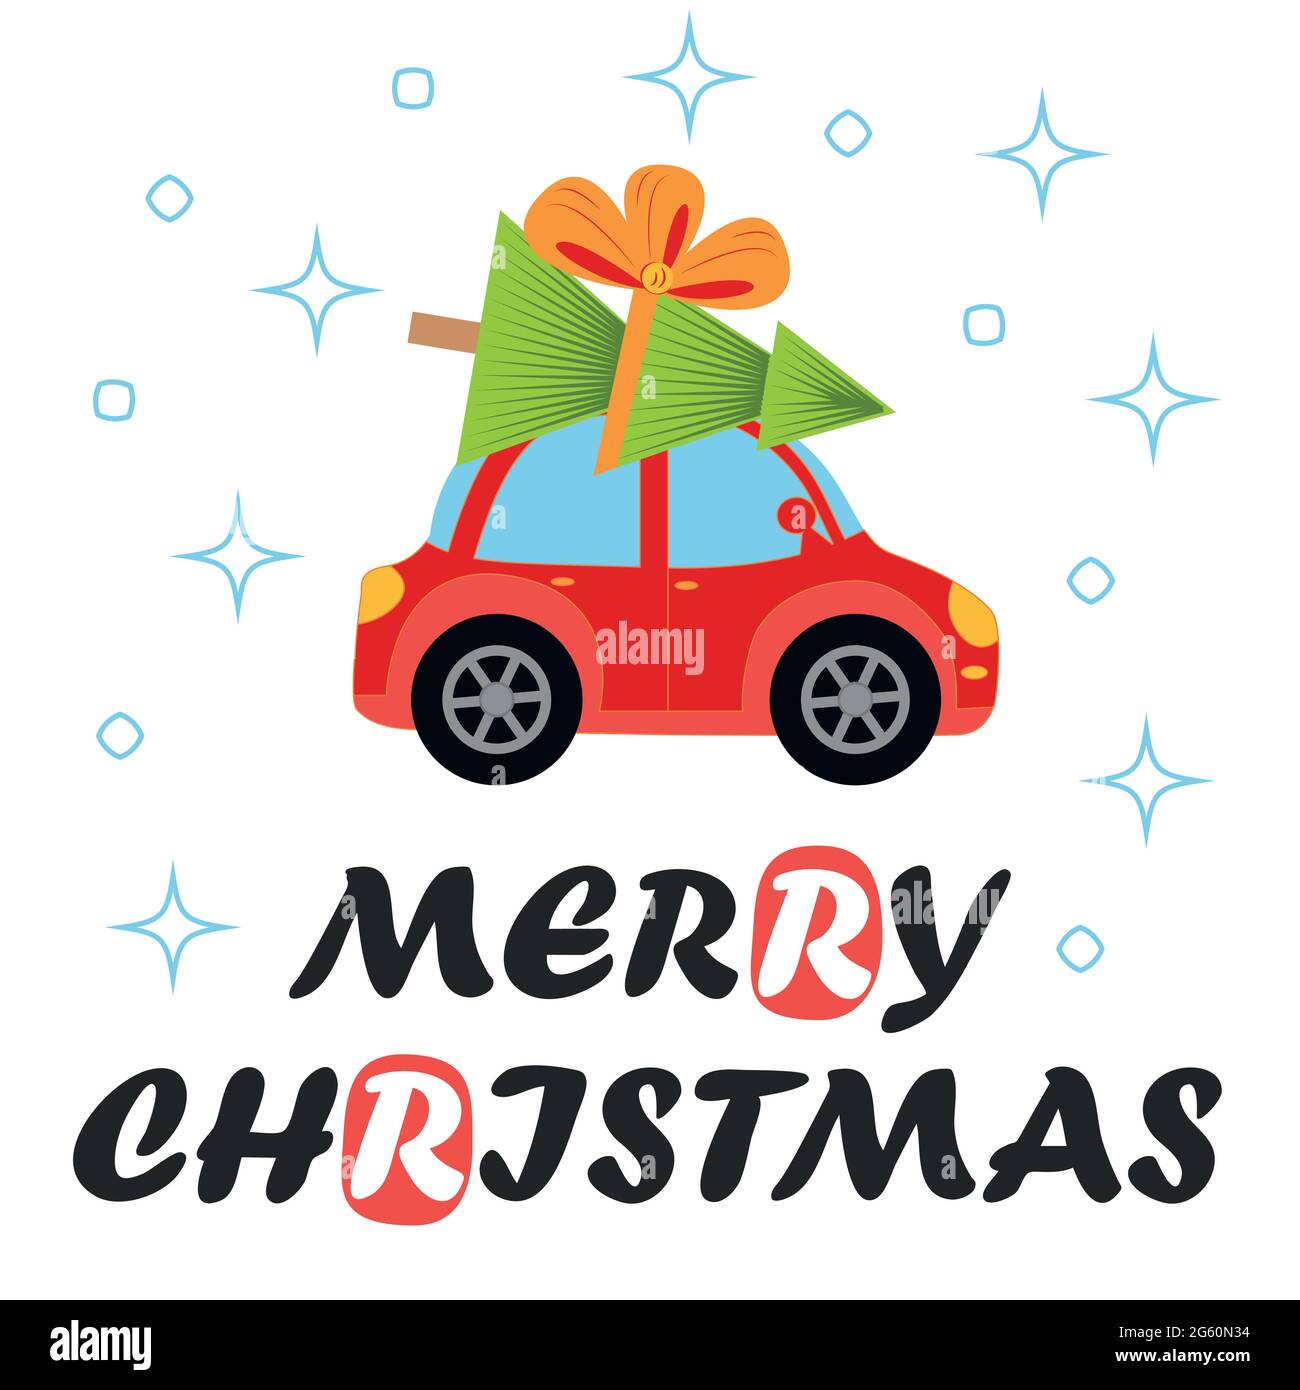 Merry christmas and happy new year illustrations. Greeting card with red retro car with christmas tree Stock Vector